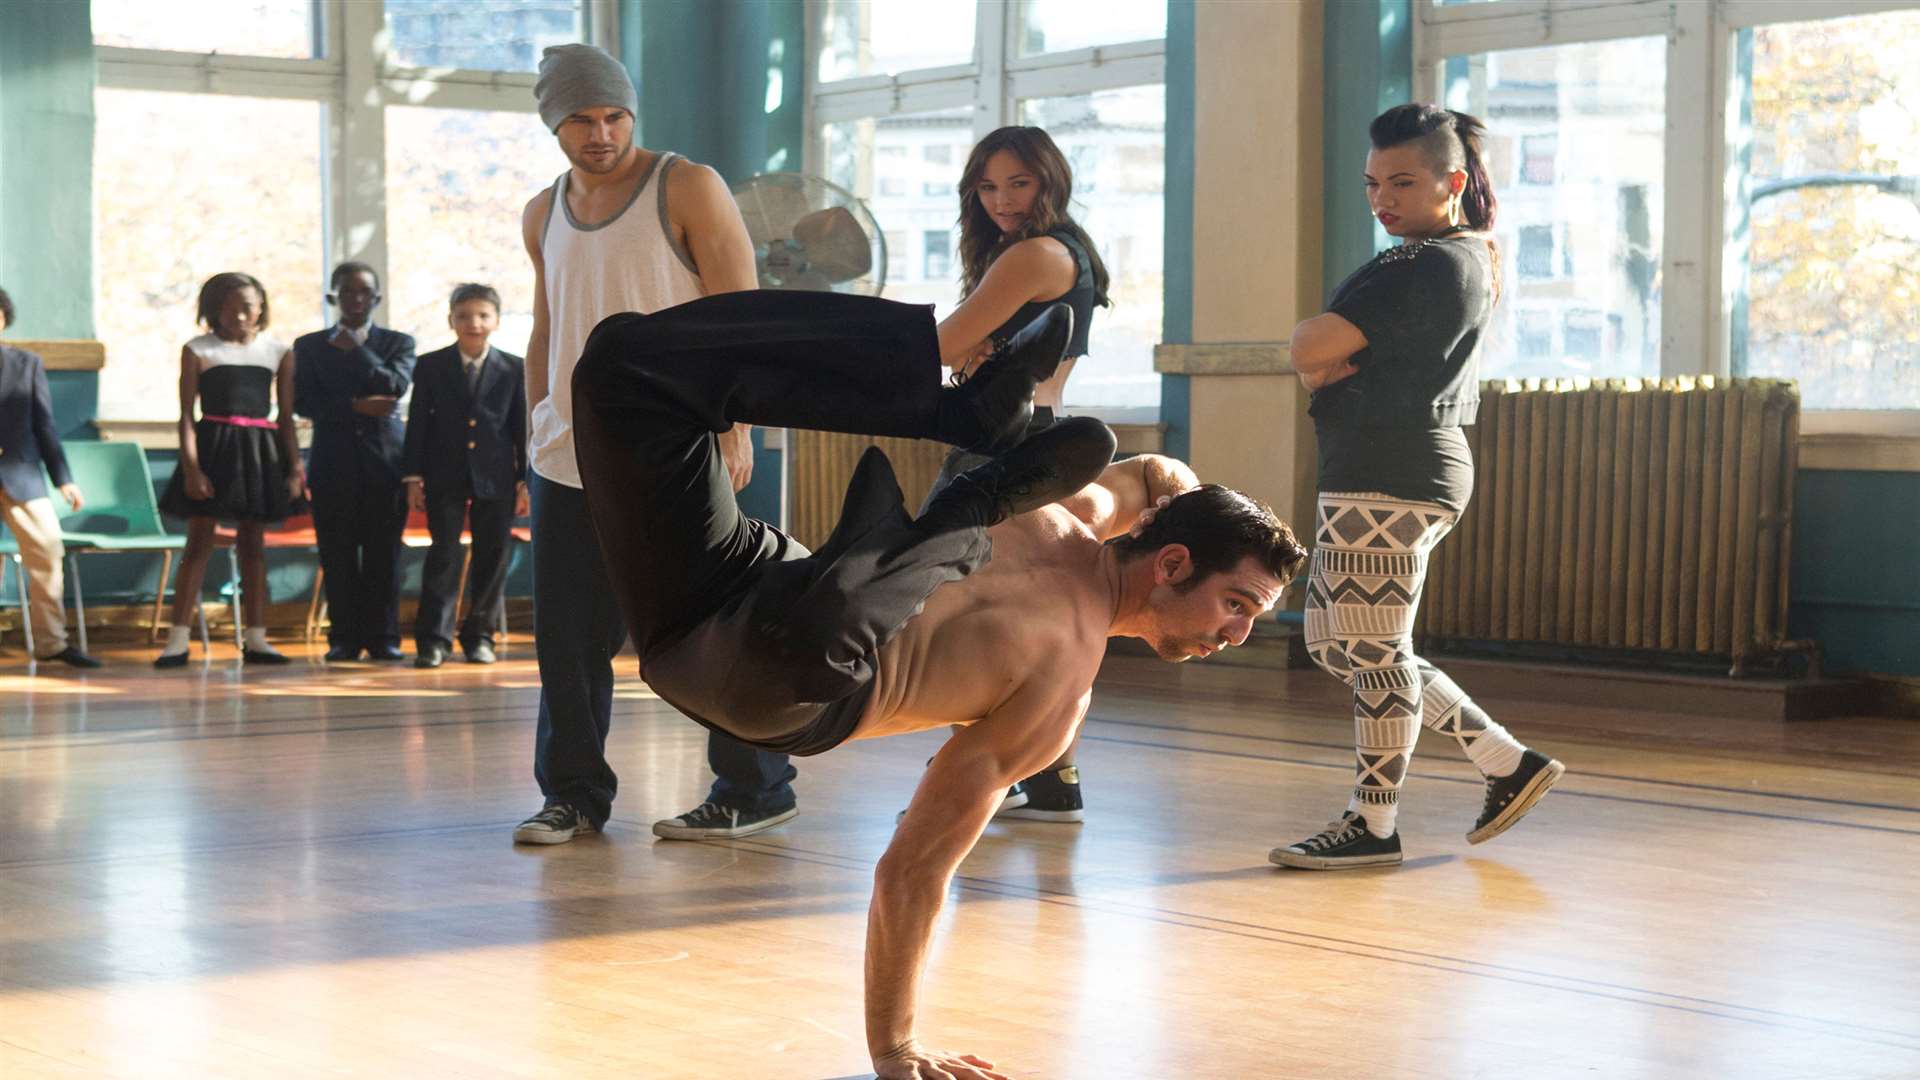 Step Up 5: All In, with Ryan Guzman & Briana Evigan. Picture: PA Photo/Universal Pictures International